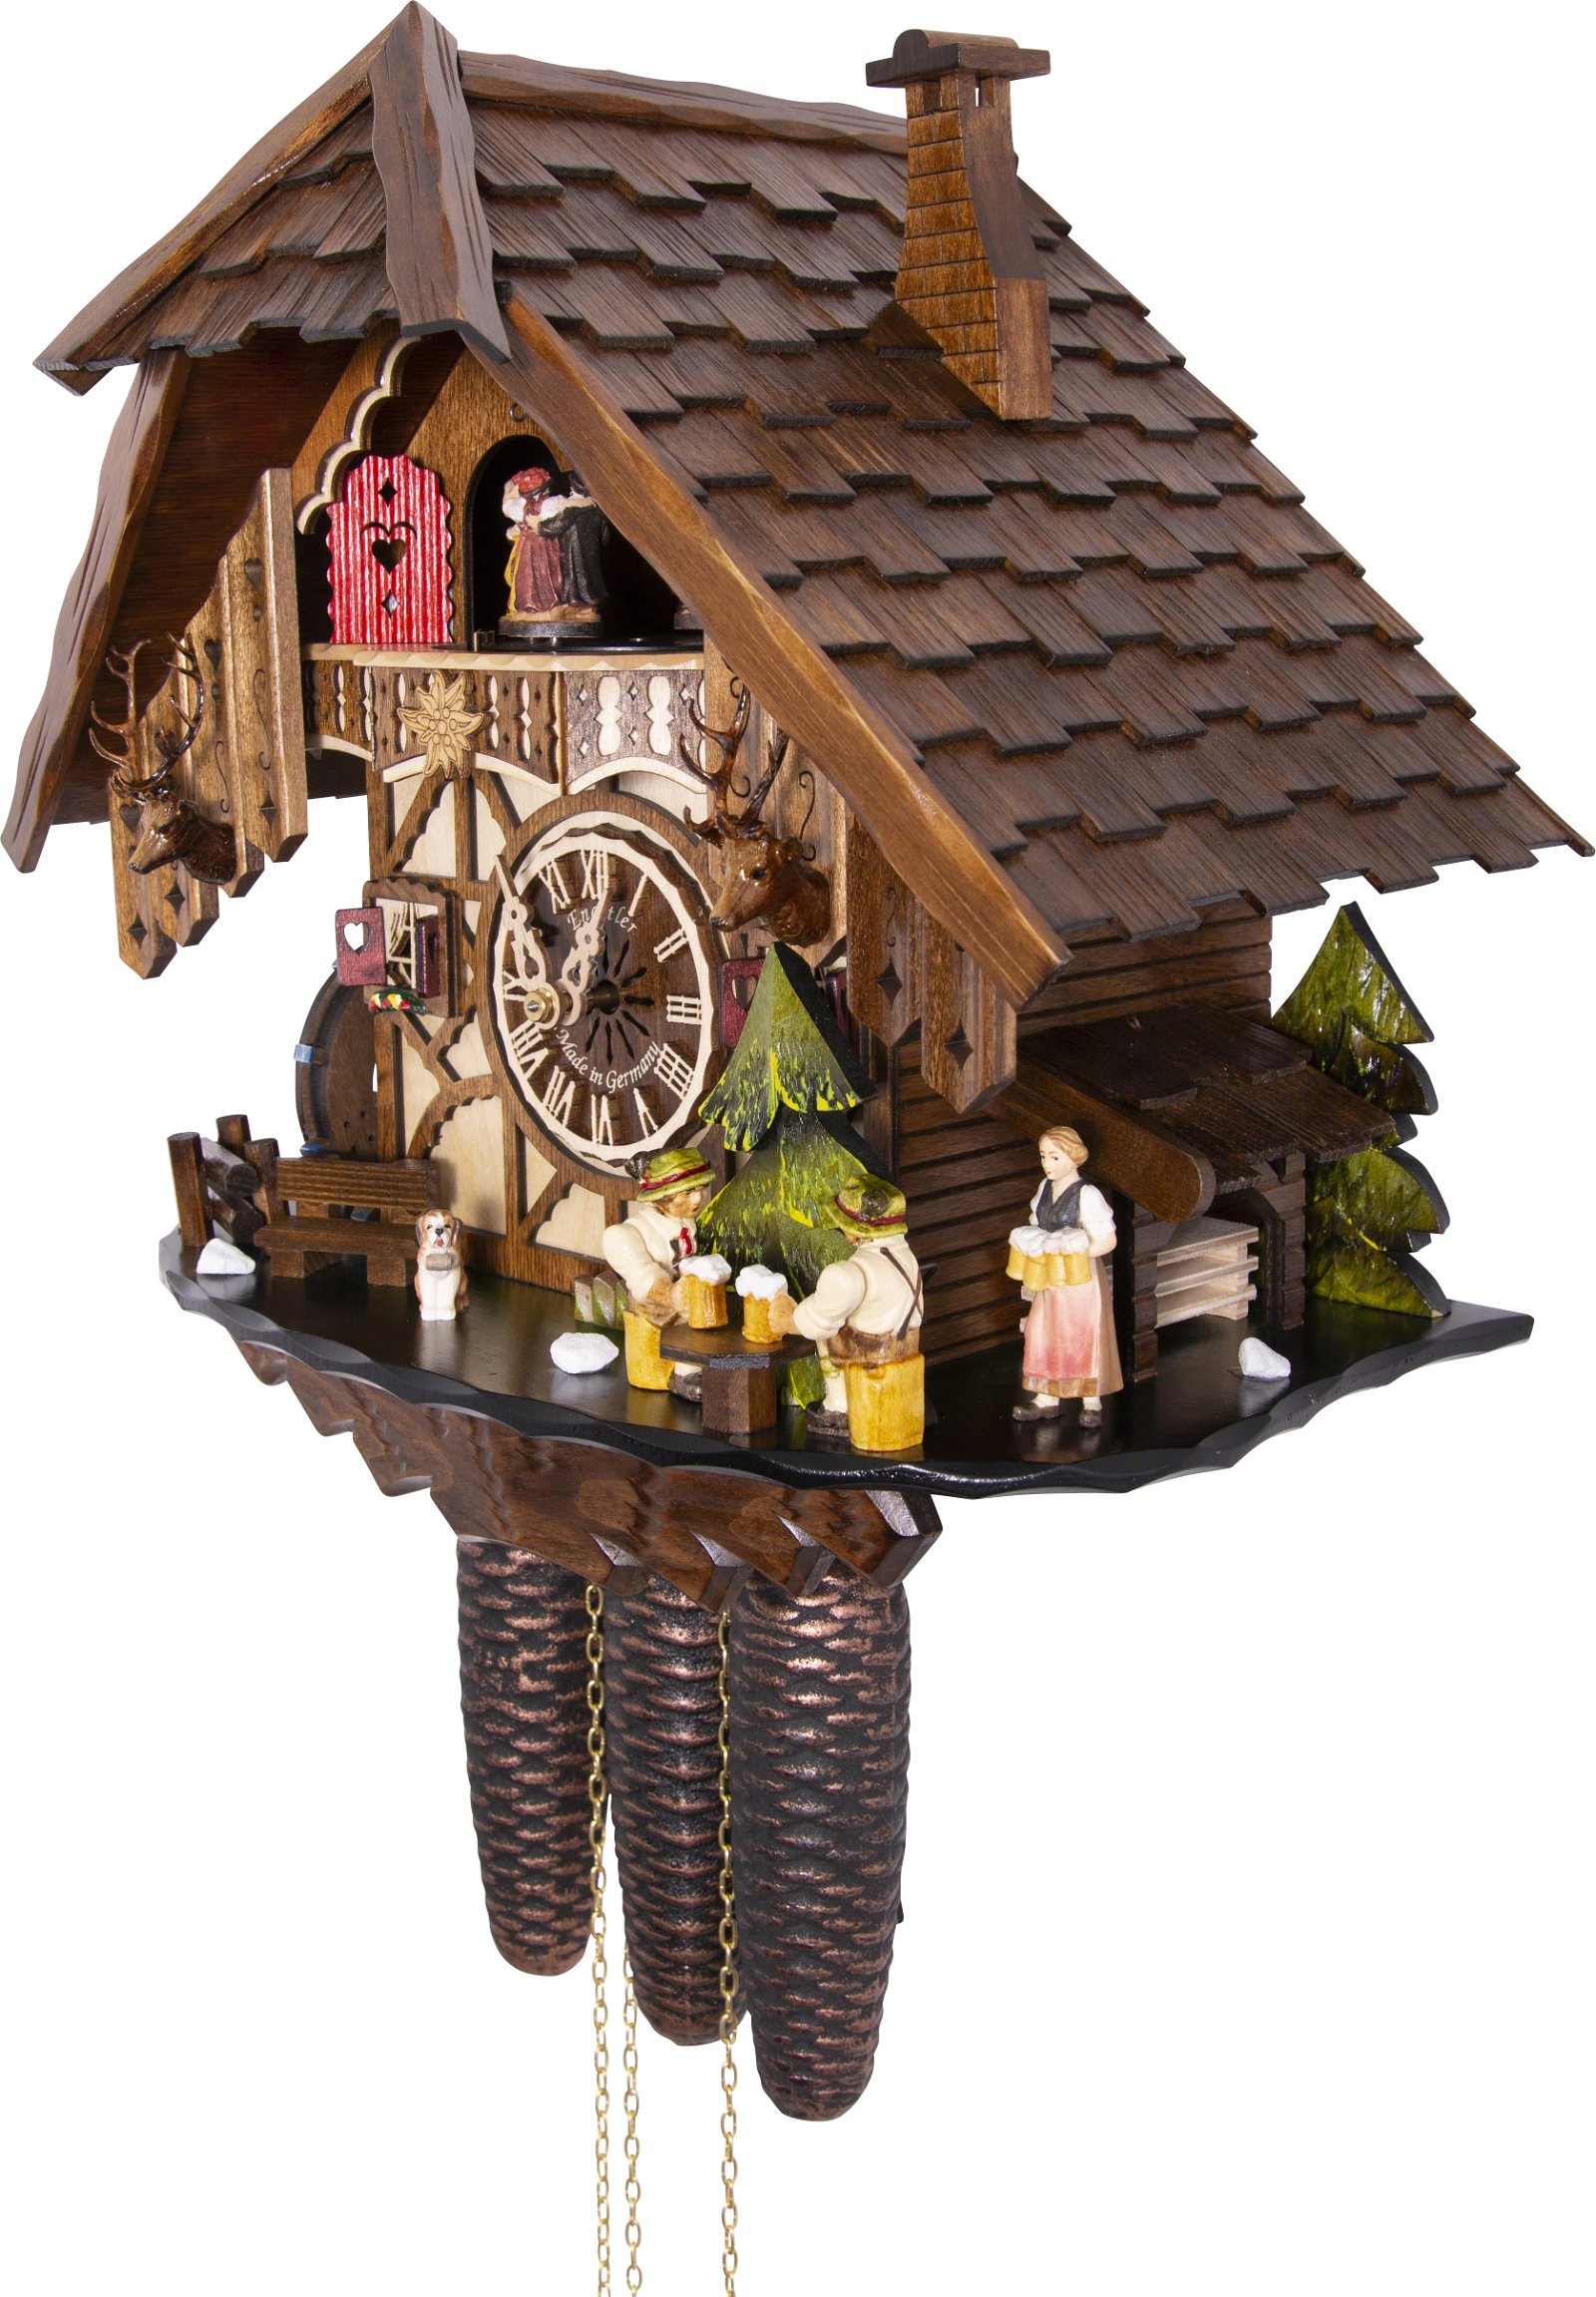 Cuckoo Clock Chalet Style 8 Day Movement 35cm by Engstler